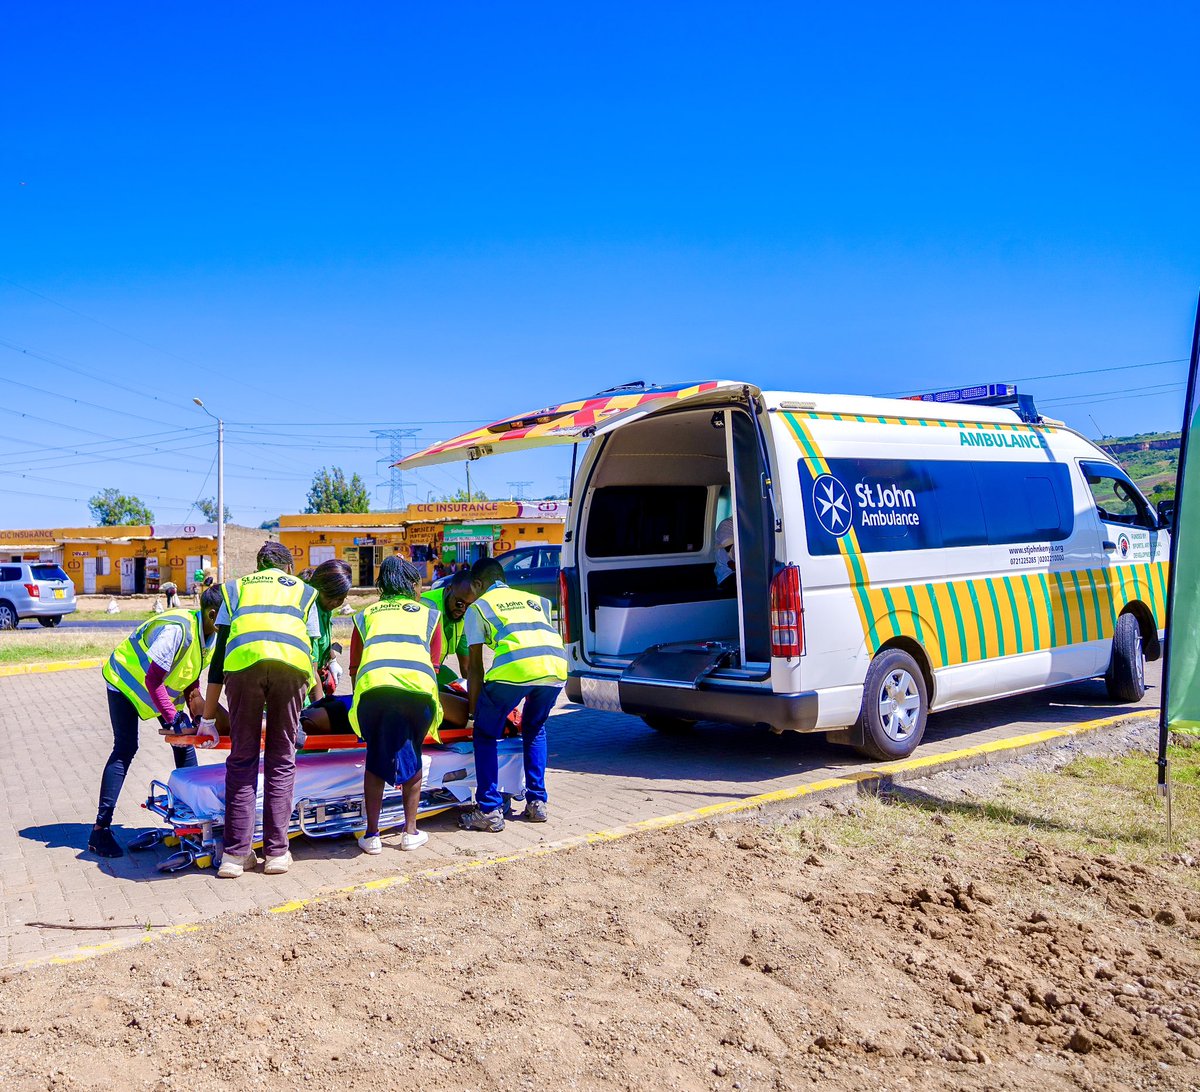 ♥️ In our commitment to support the well-being of travelers and communities, @BountifulSafari through our #BountifulCARES initiative is proud to partner on the new @StJohnKenya Karai Trauma Clinic offering life-saving care on the Nairobi-Nakuru Highway.